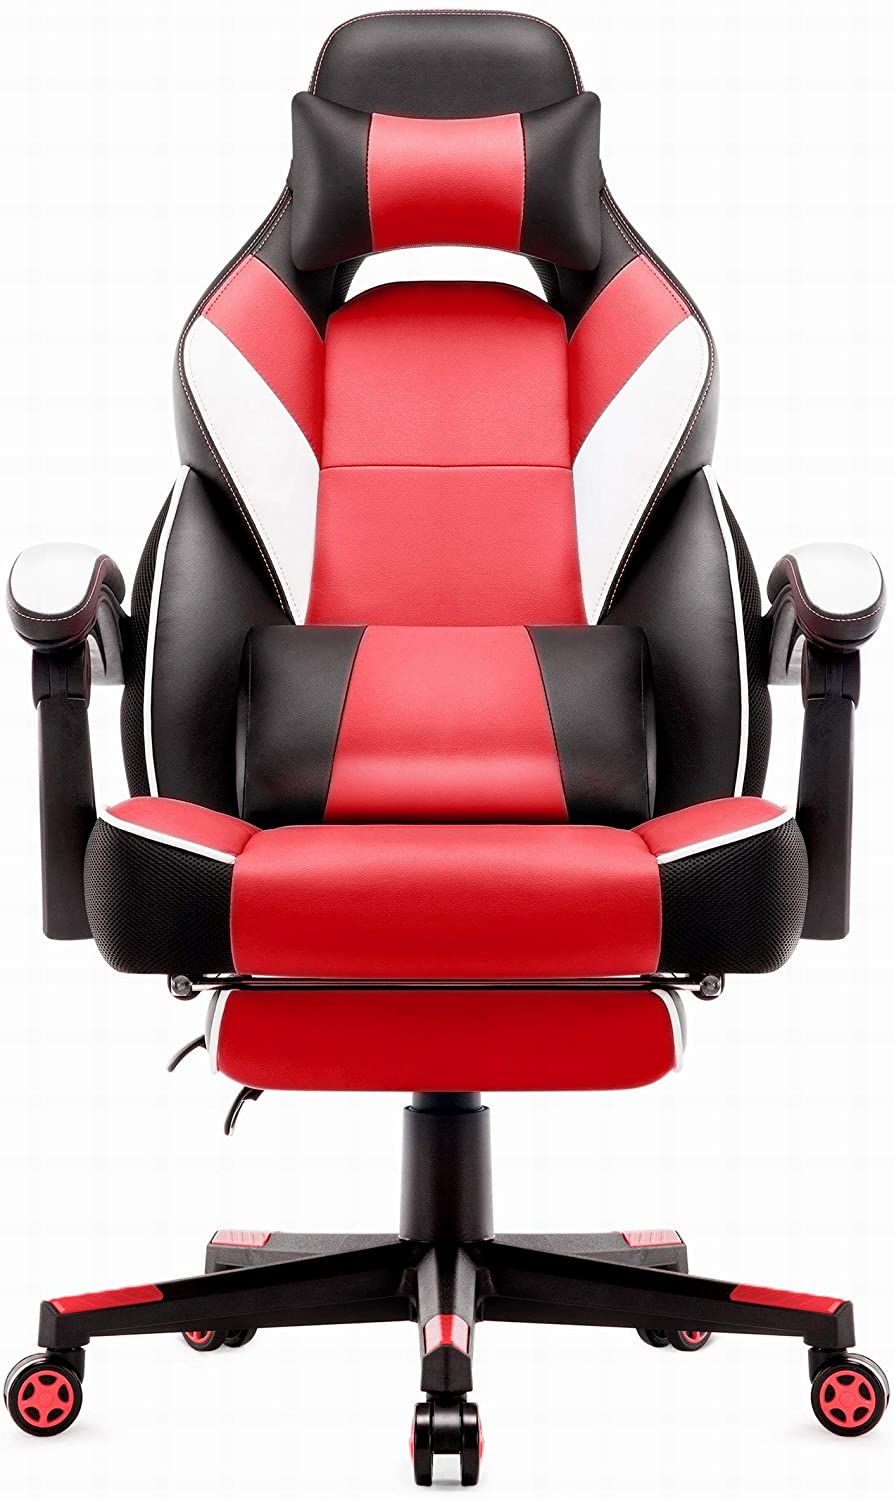 Game Chair Computer Gaming Chair With Ergonomic High Back Gamers Chairs